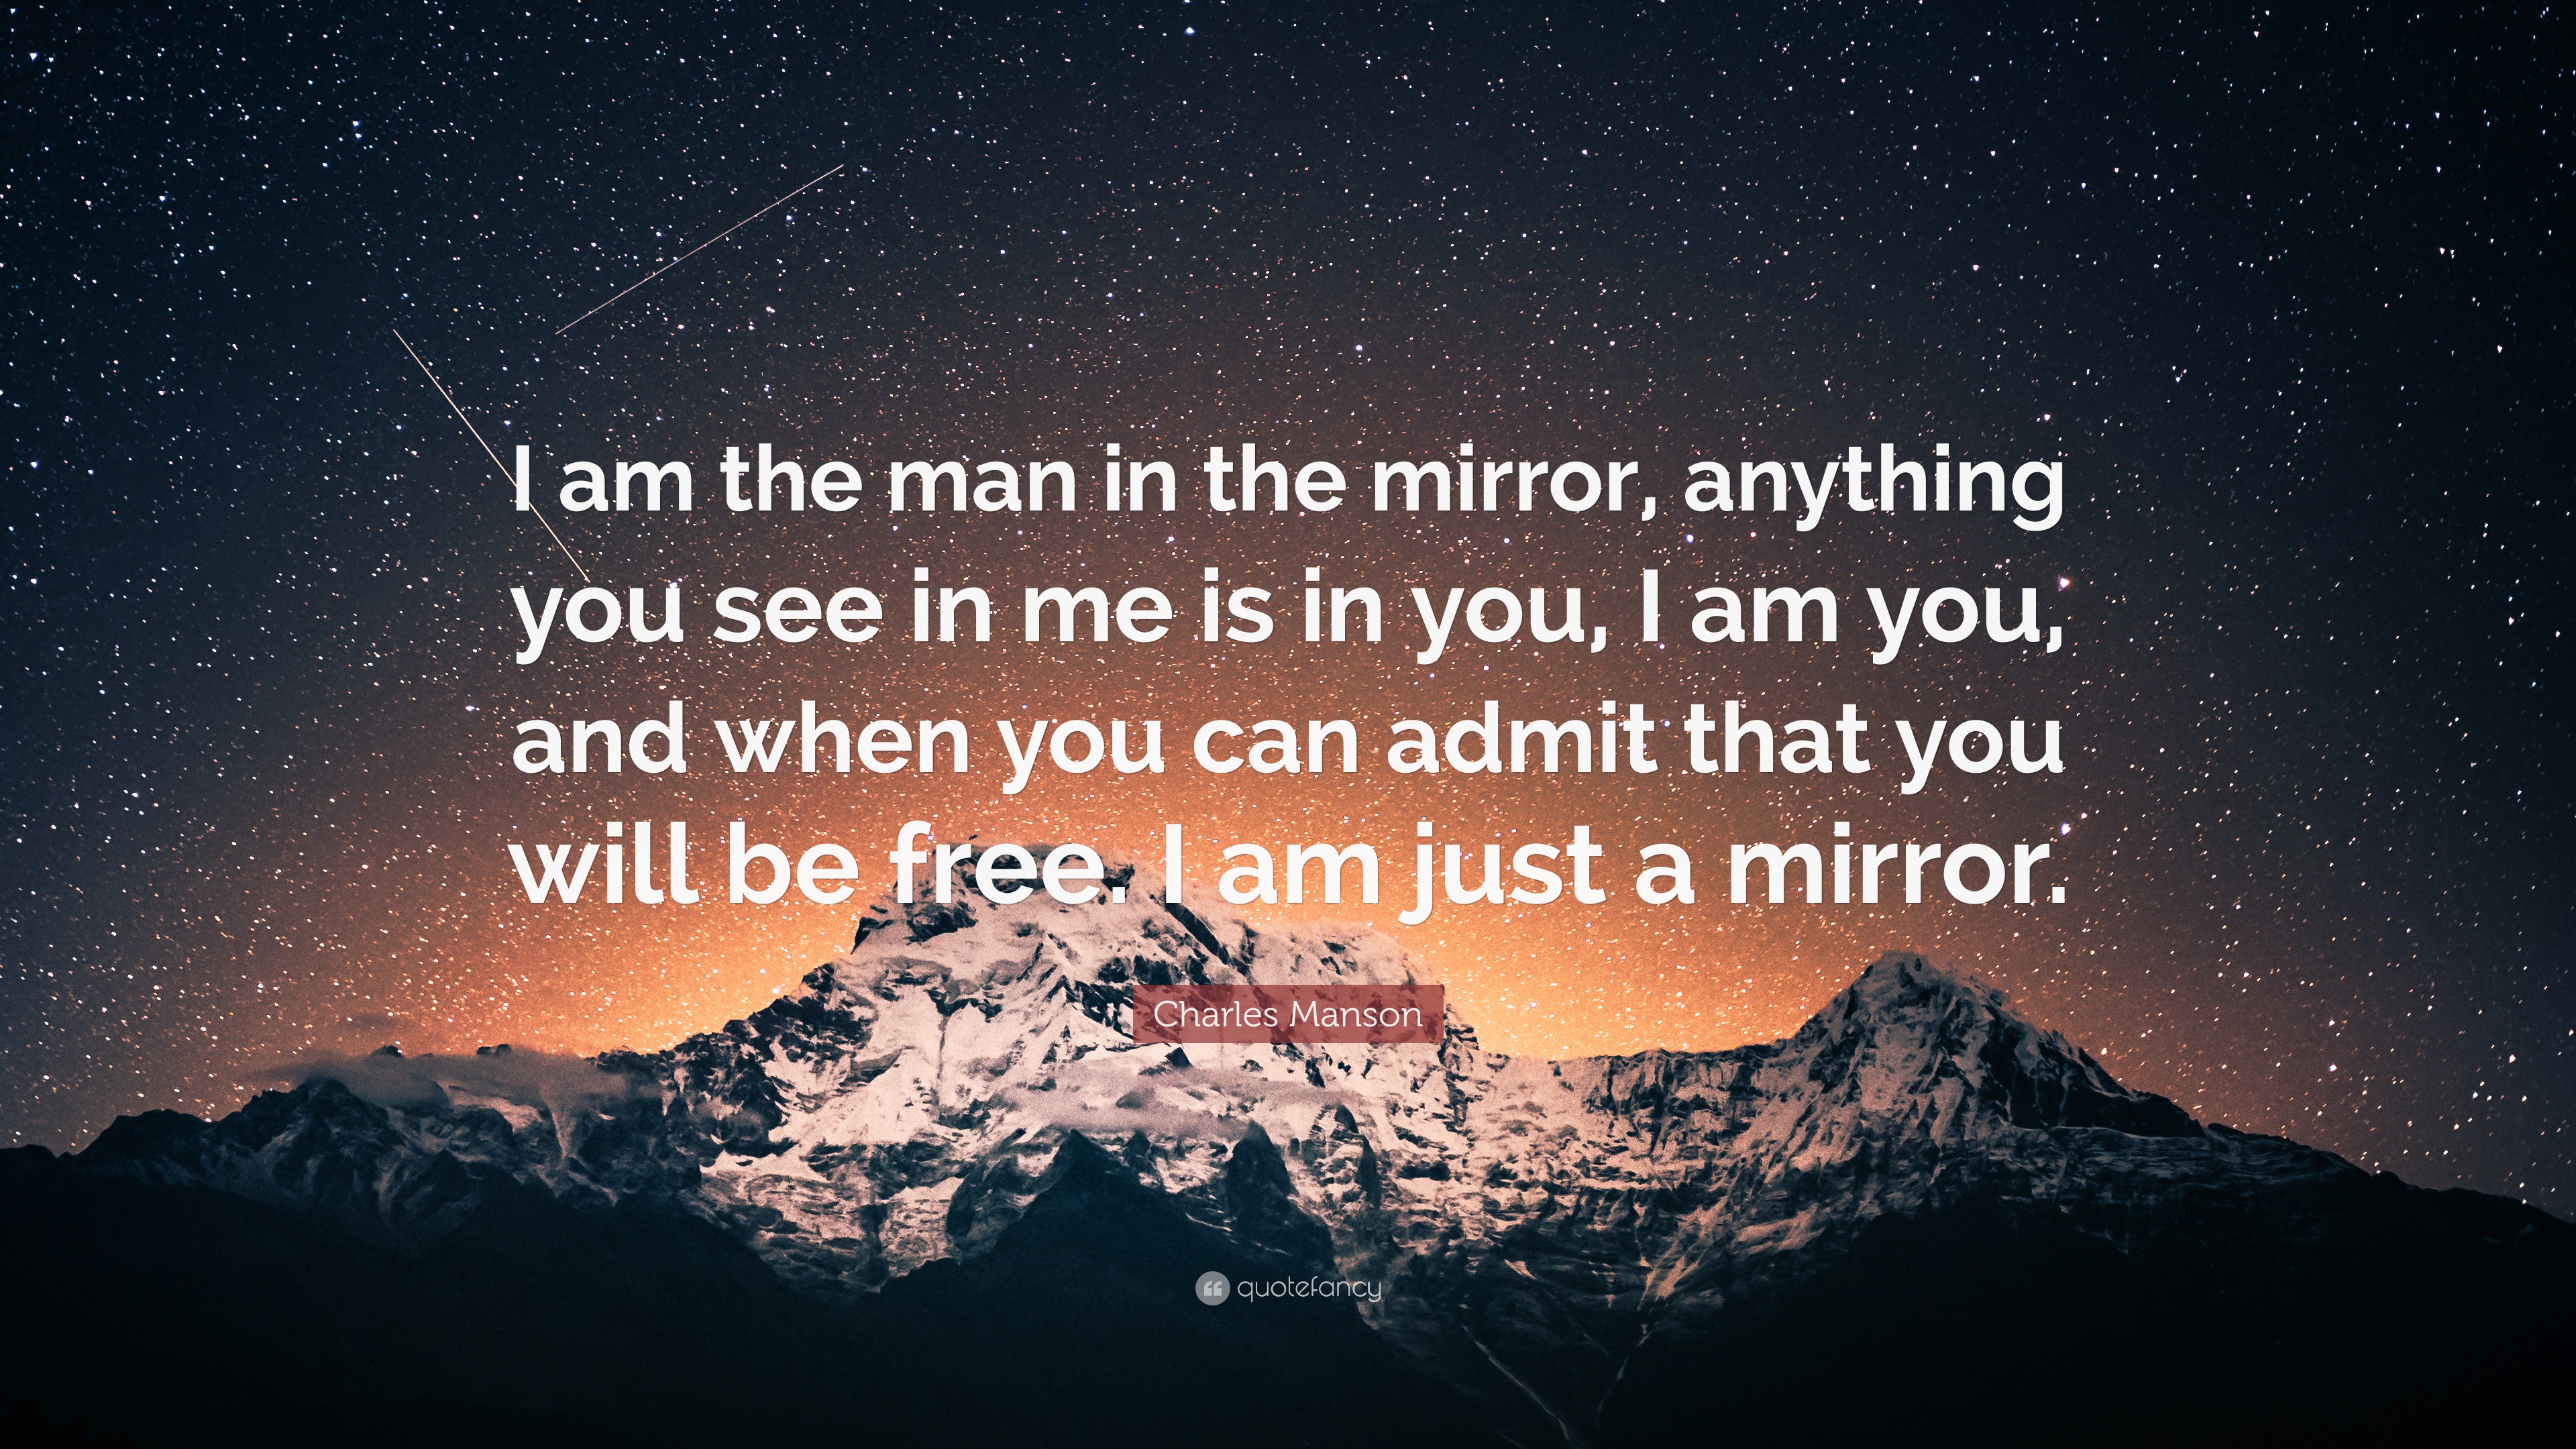 Charles Manson Quote: "I am the man in the mirror, anything you see in me is in you, I am you ...